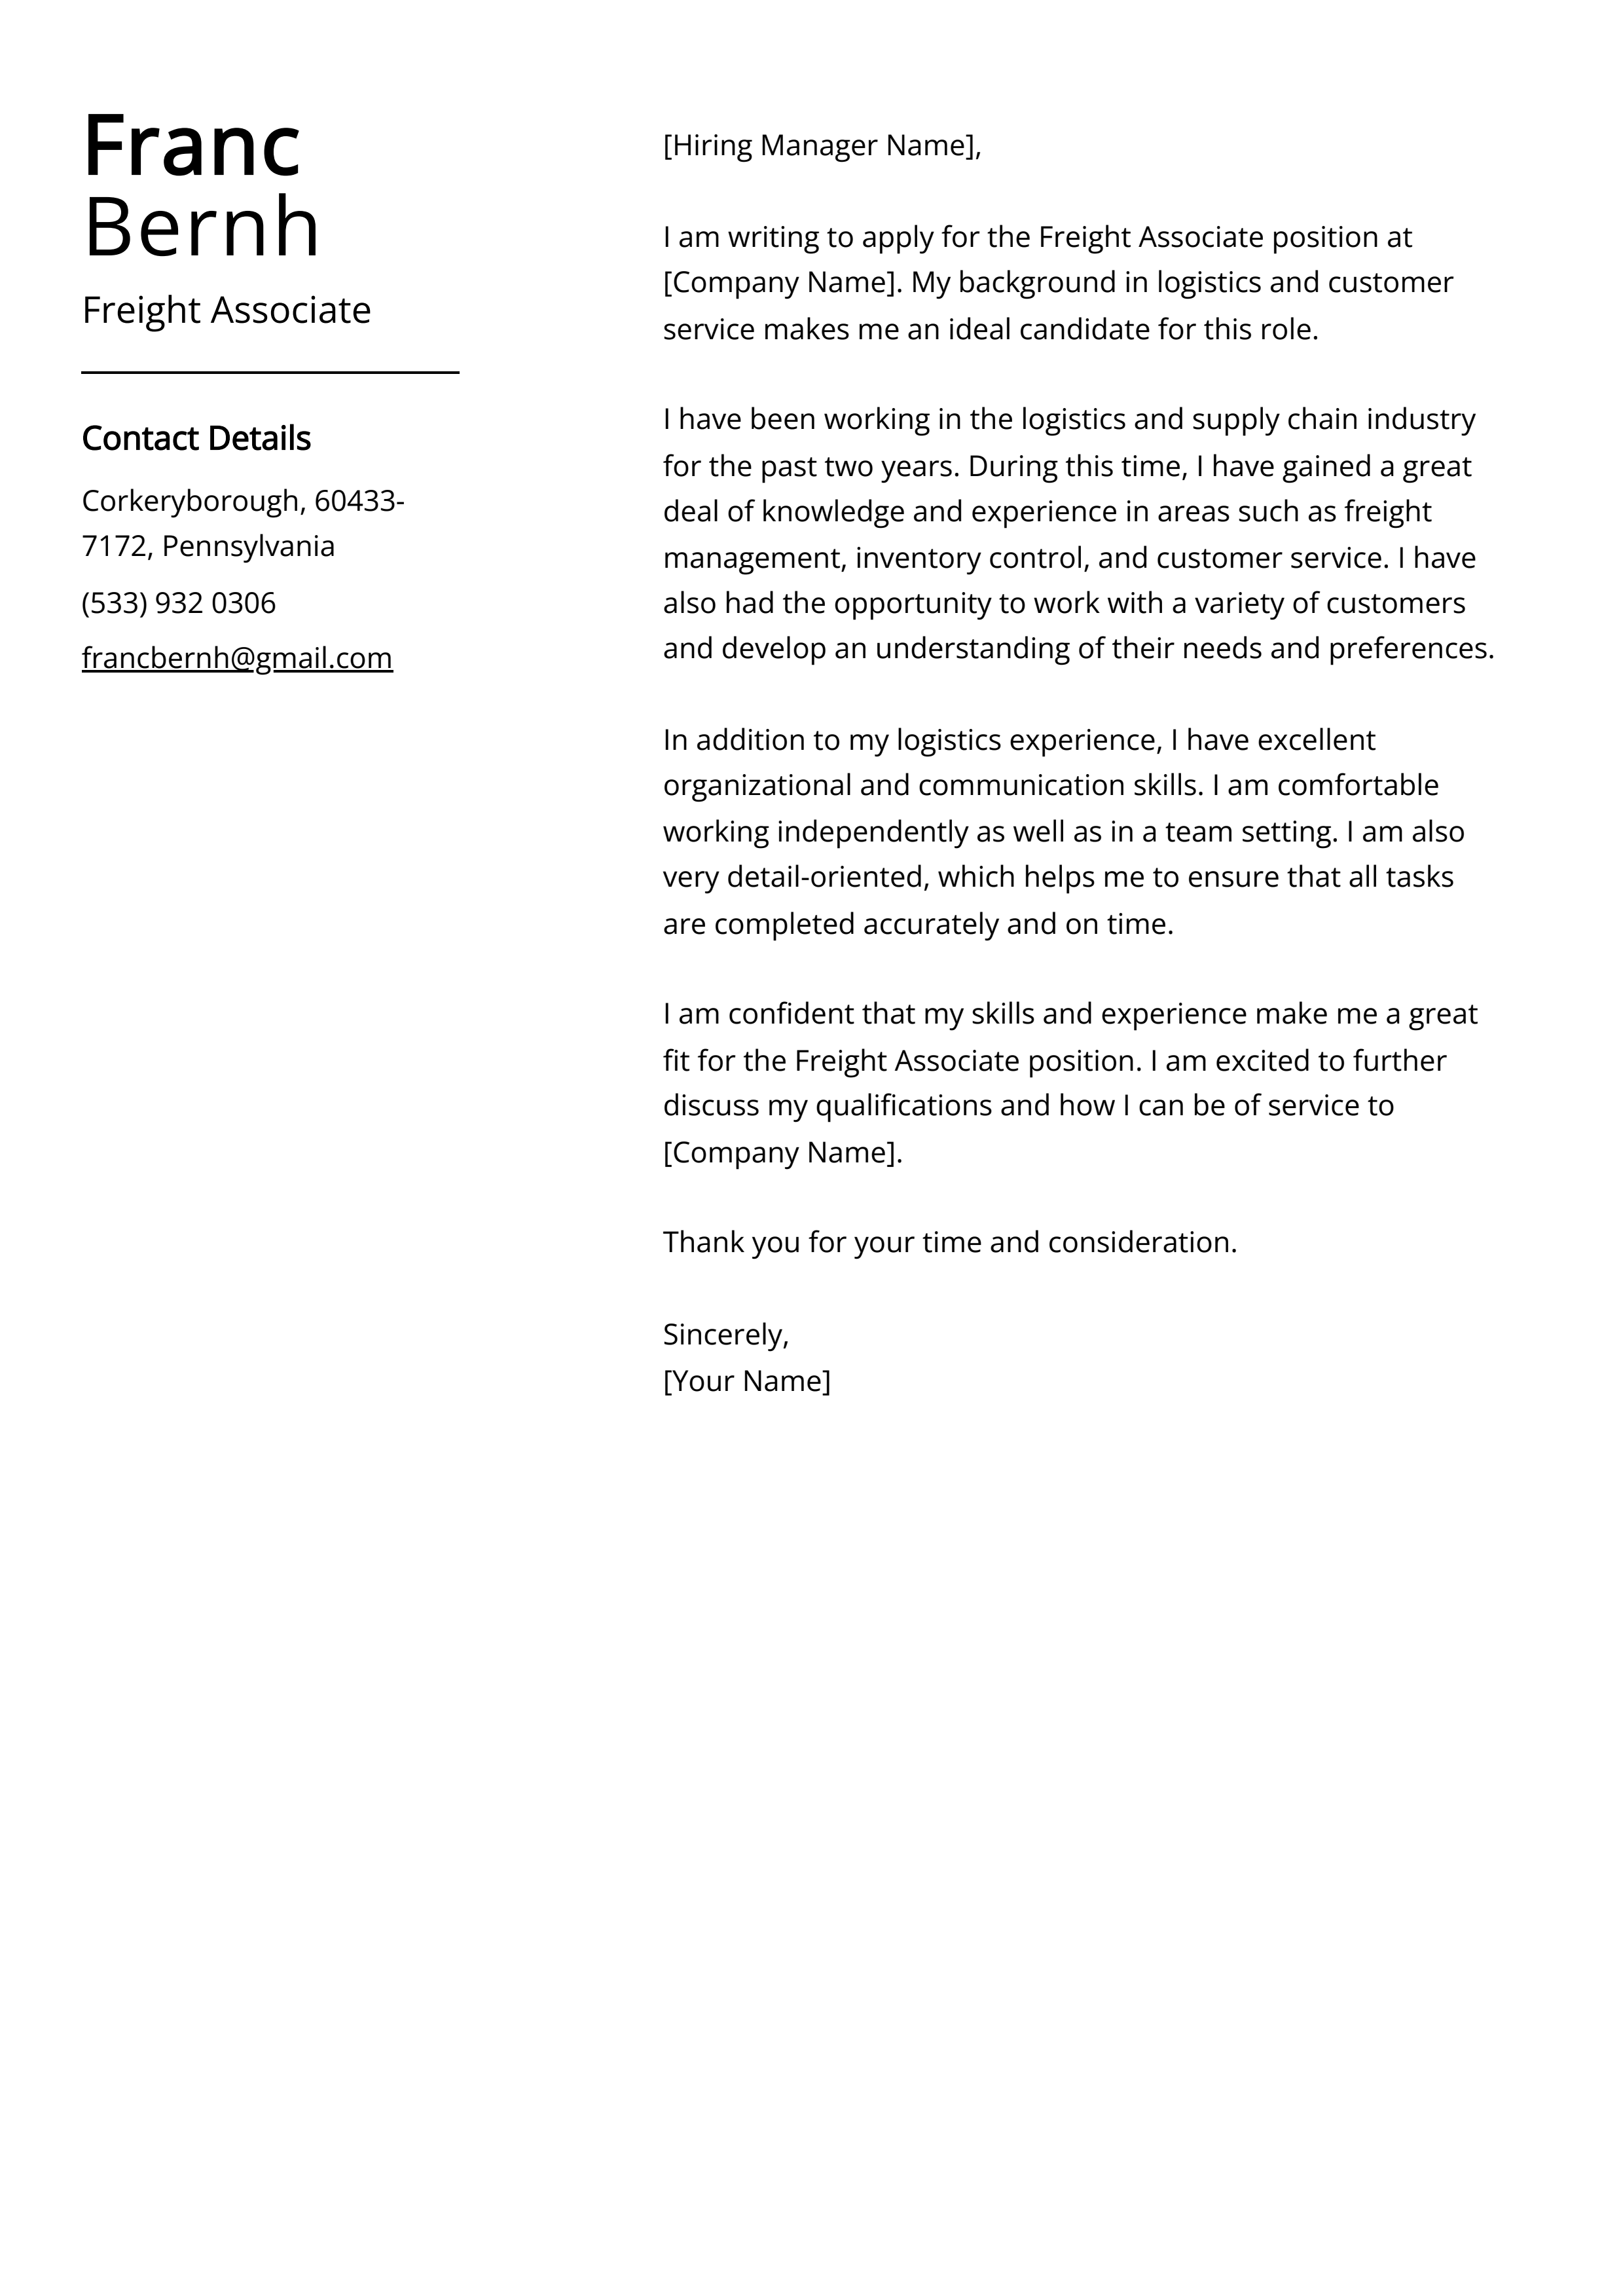 Freight Associate Cover Letter Example